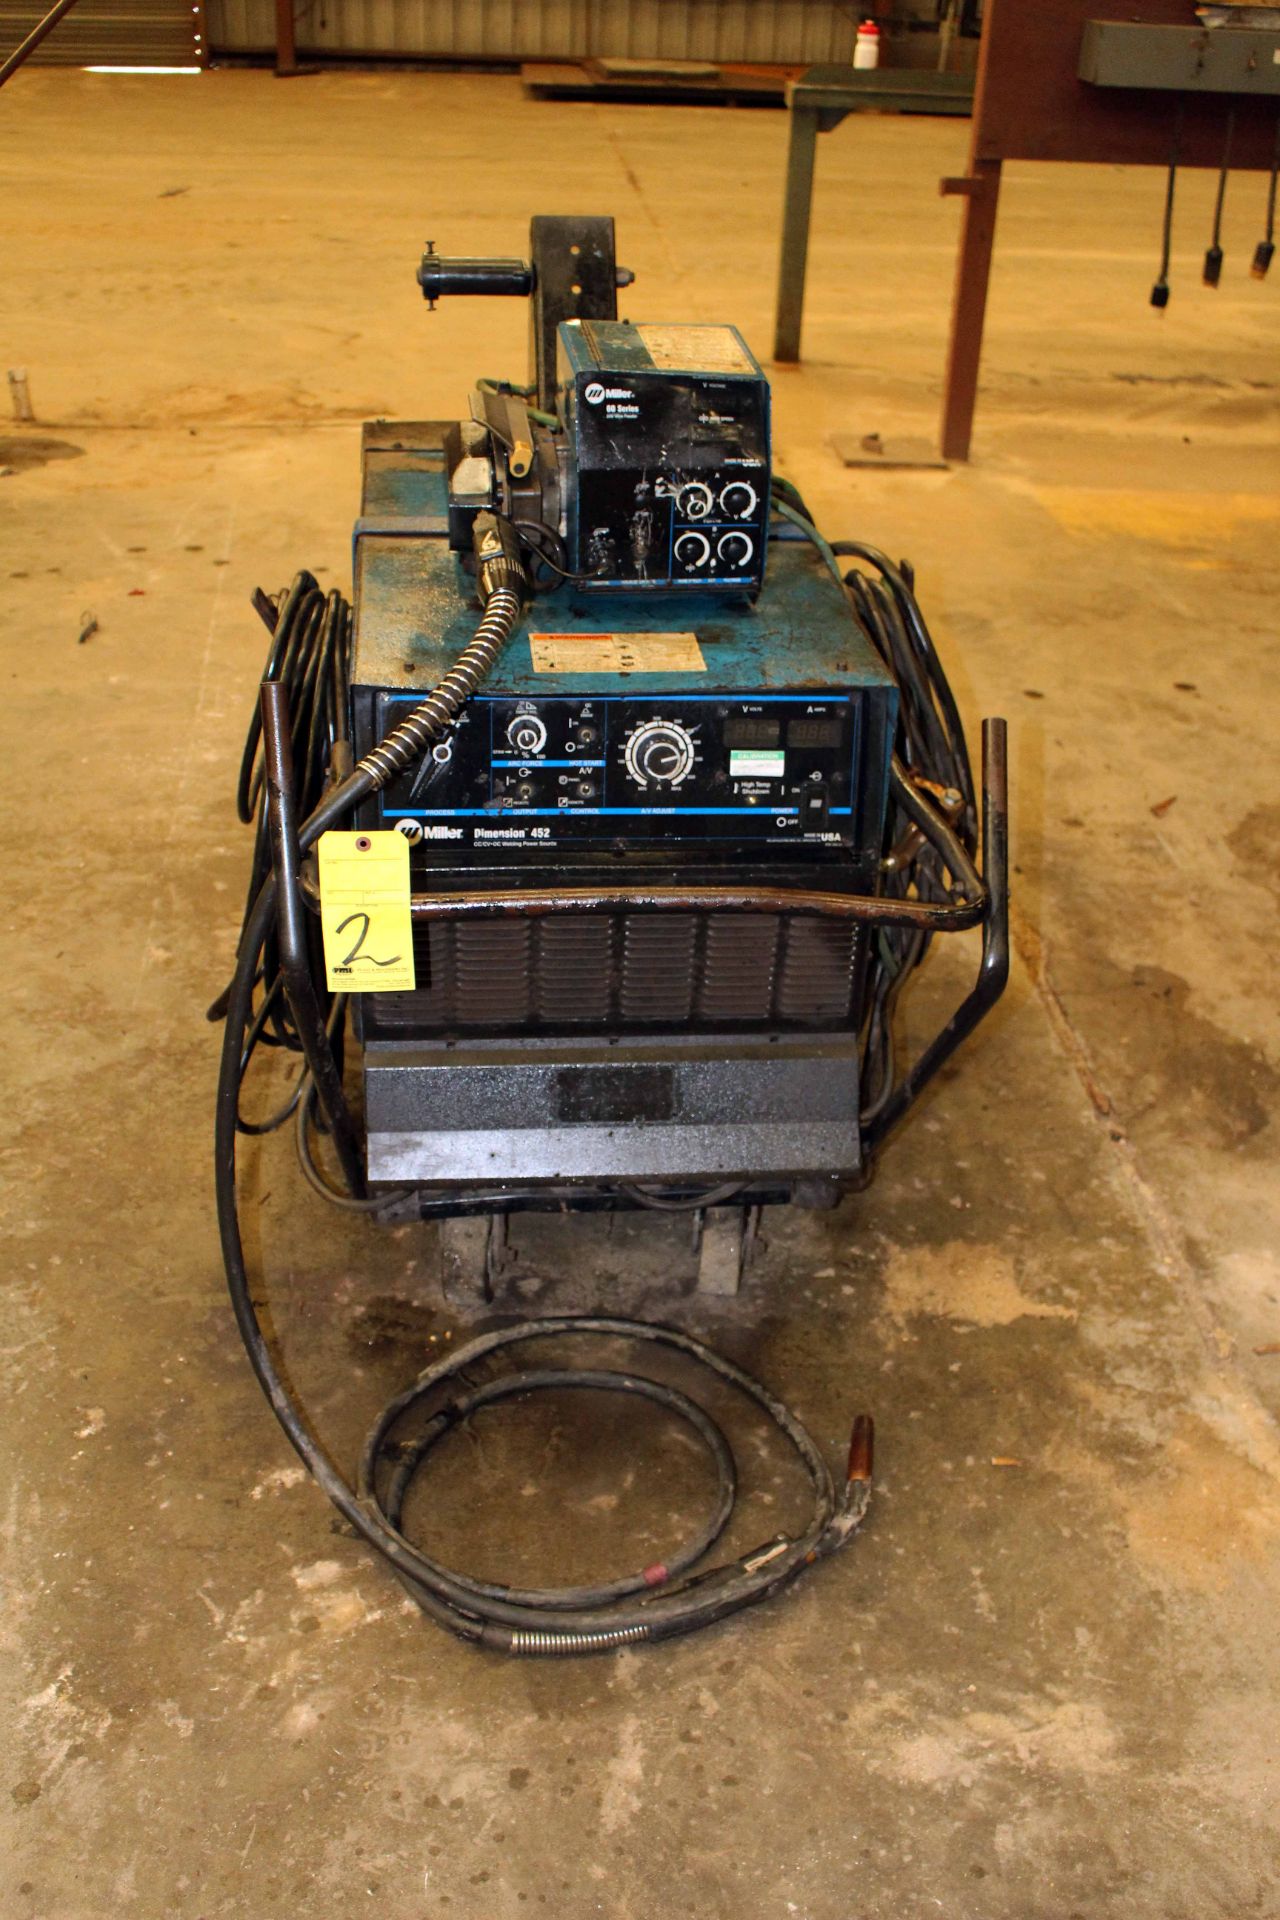 MIG WELDER, MILLER DIMENSION MDL. 452, 450 amps @ 38 v., 100% duty cycle, Mdl. 22A wire feeder, S/